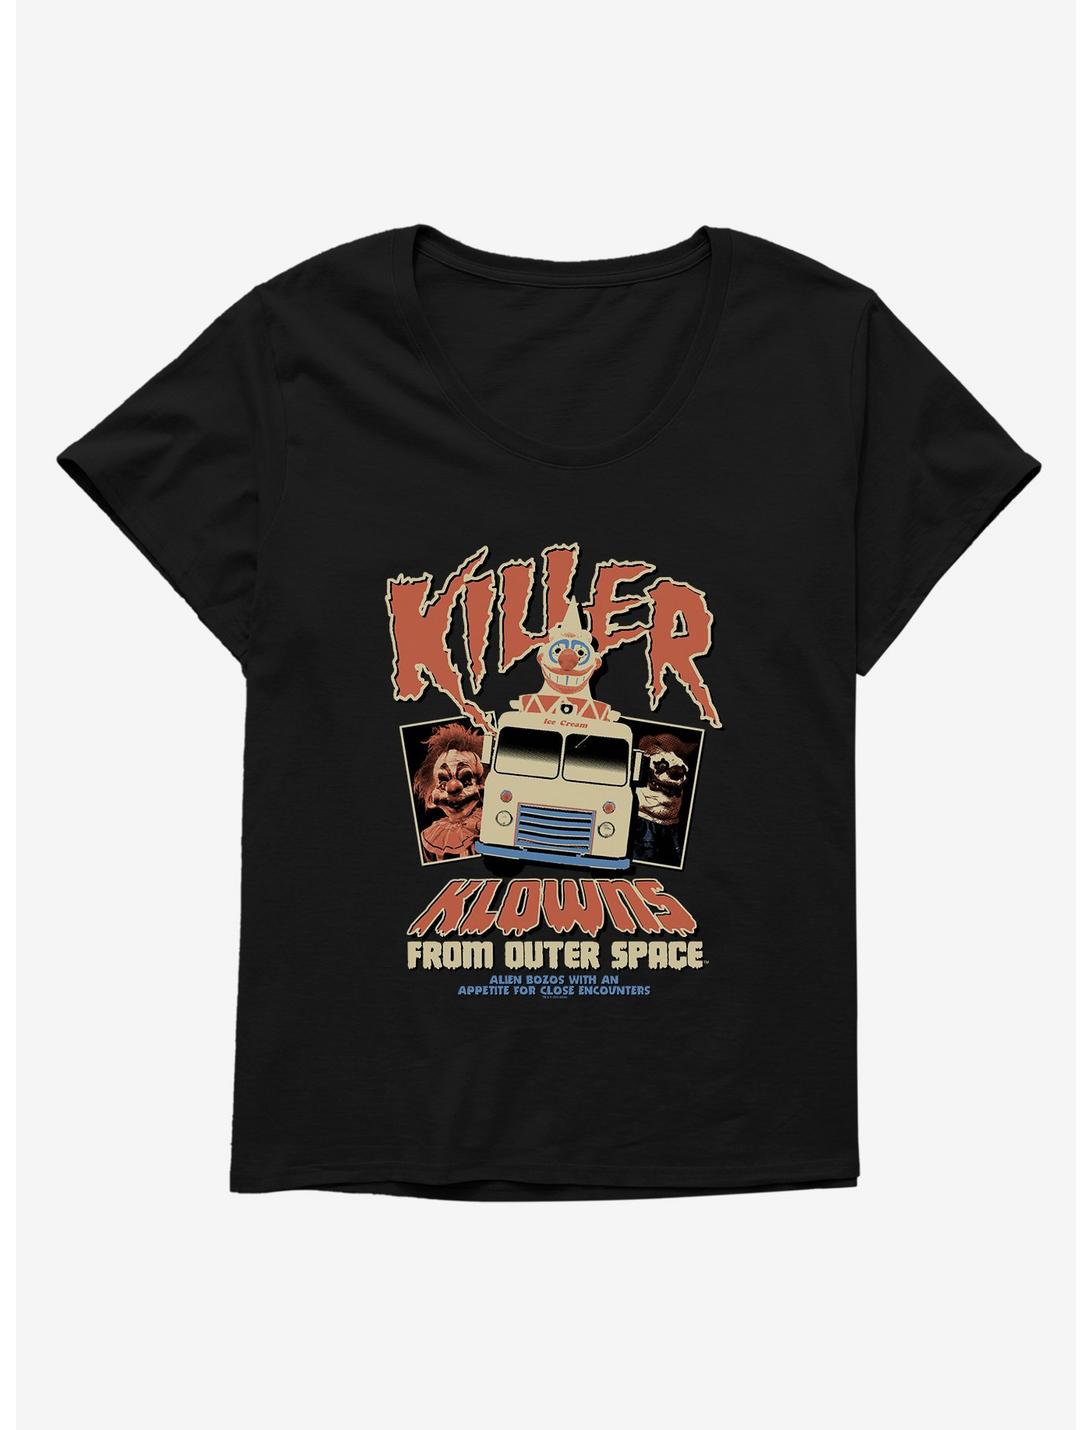 Killer Klowns From Outer Space Vintage Movie Poster Womens T-Shirt Plus Size, , hi-res